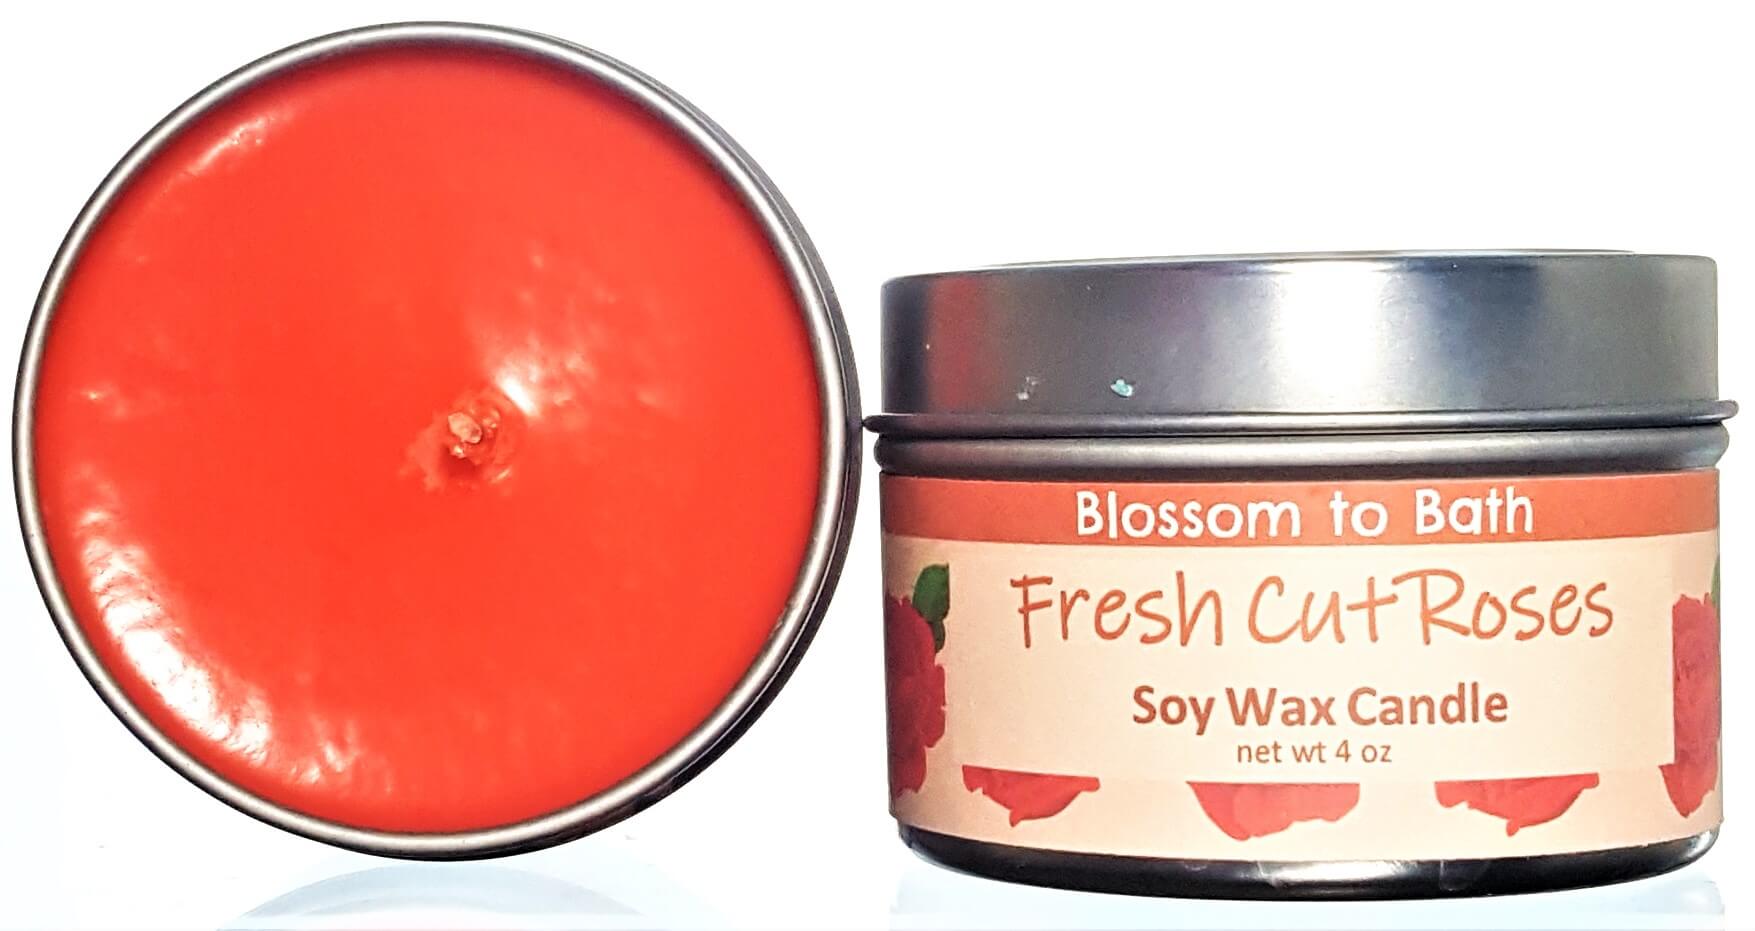 Buy Blossom to Bath Fresh Cut Roses Soy Wax Candle from Flowersong Soap Studio.  Fill the air with a charming fragrance that lasts for hours  A true rose fragrance, the scent captures the splendor of a newly blossomed rose.